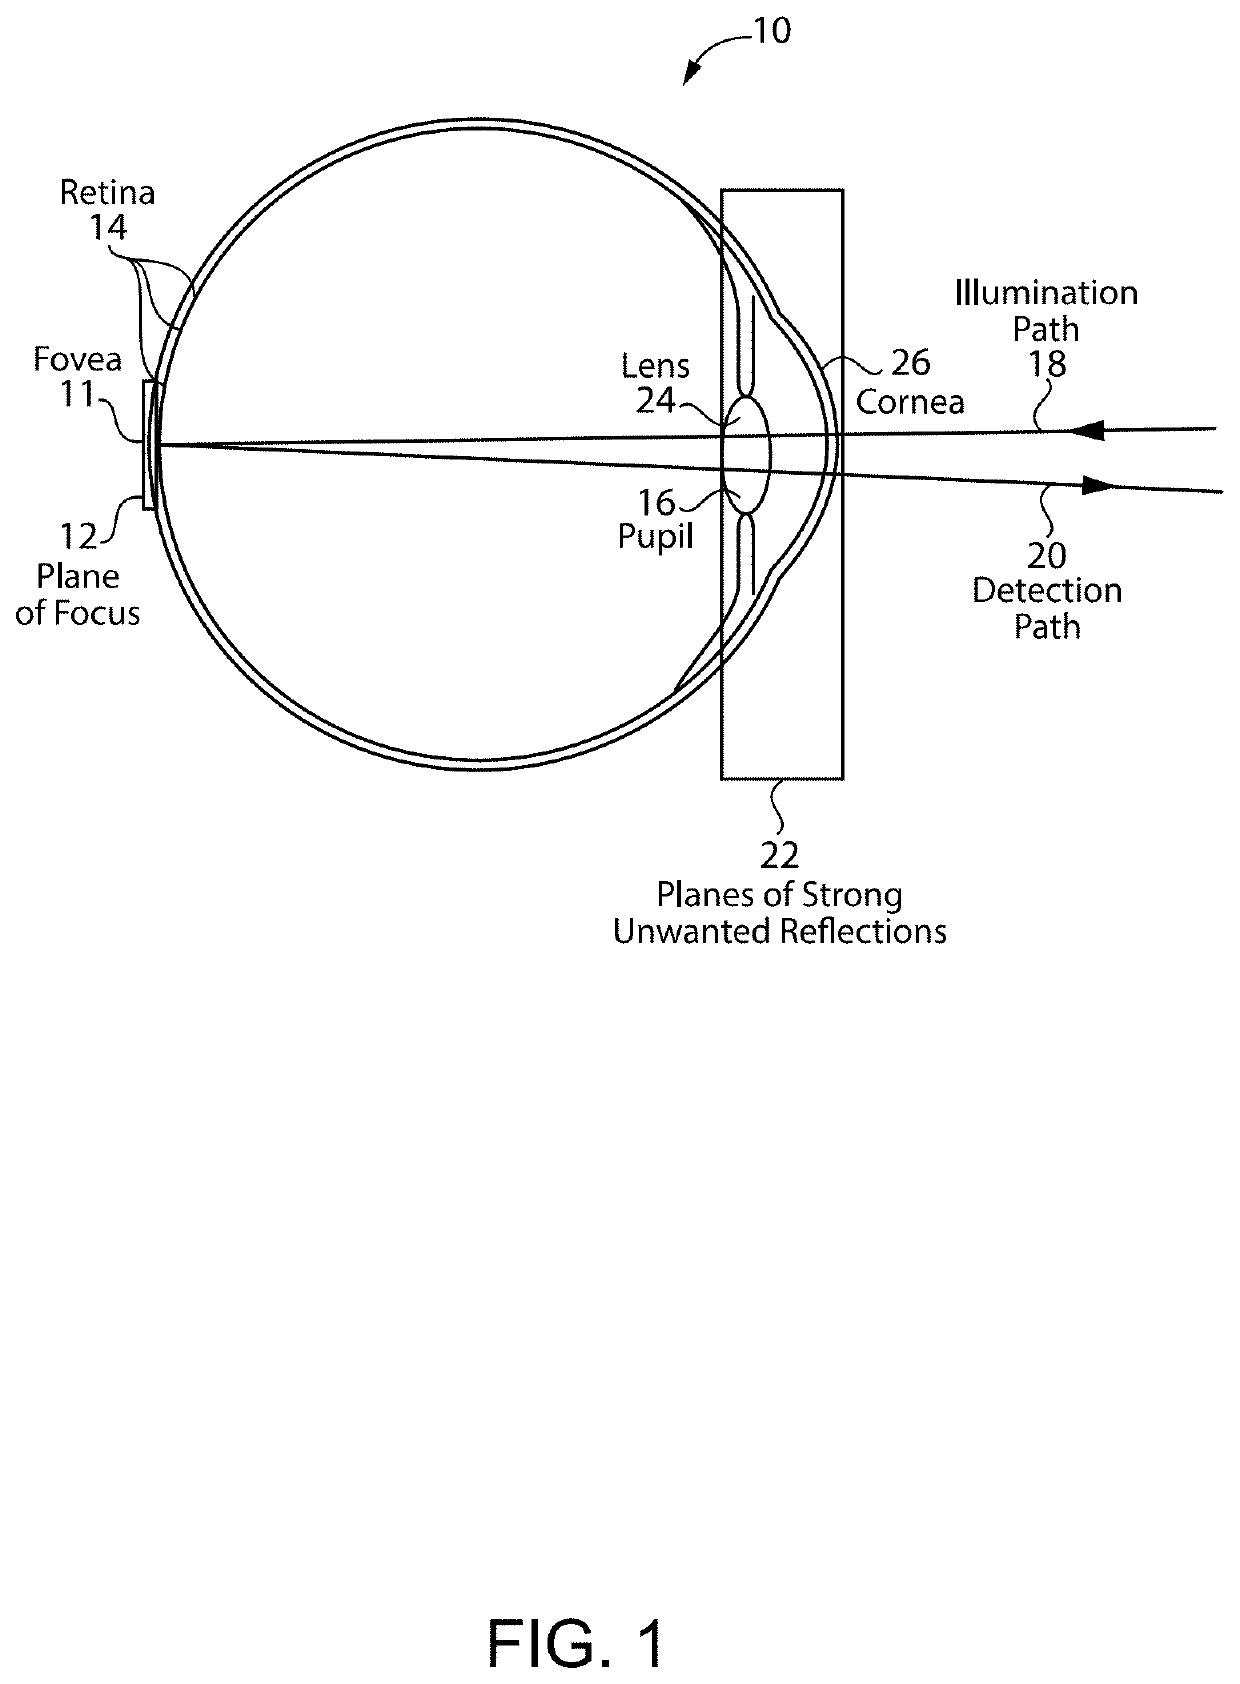 Methods, systems, and devices for vision testing